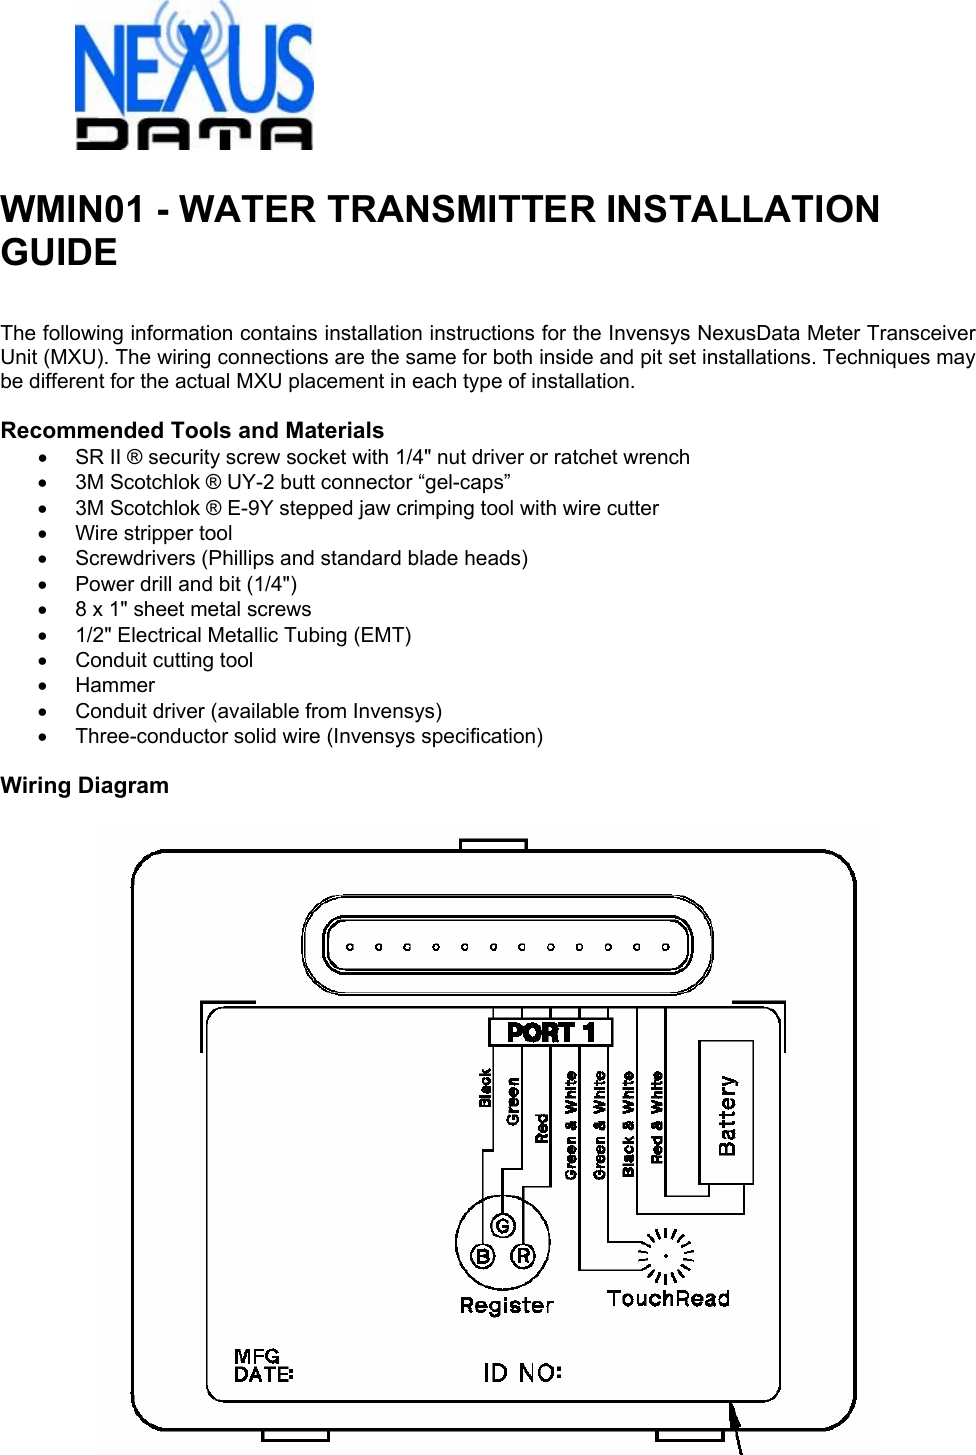  WMIN01 - WATER TRANSMITTER INSTALLATION GUIDE   The following information contains installation instructions for the Invensys NexusData Meter Transceiver Unit (MXU). The wiring connections are the same for both inside and pit set installations. Techniques may be different for the actual MXU placement in each type of installation.  Recommended Tools and Materials •  SR II ® security screw socket with 1/4&quot; nut driver or ratchet wrench •  3M Scotchlok ® UY-2 butt connector “gel-caps” •  3M Scotchlok ® E-9Y stepped jaw crimping tool with wire cutter •  Wire stripper tool •  Screwdrivers (Phillips and standard blade heads) •  Power drill and bit (1/4&quot;) •  8 x 1&quot; sheet metal screws •  1/2&quot; Electrical Metallic Tubing (EMT) •  Conduit cutting tool • Hammer •  Conduit driver (available from Invensys) • Three-conductor solid wire (Invensys specification)  Wiring Diagram    